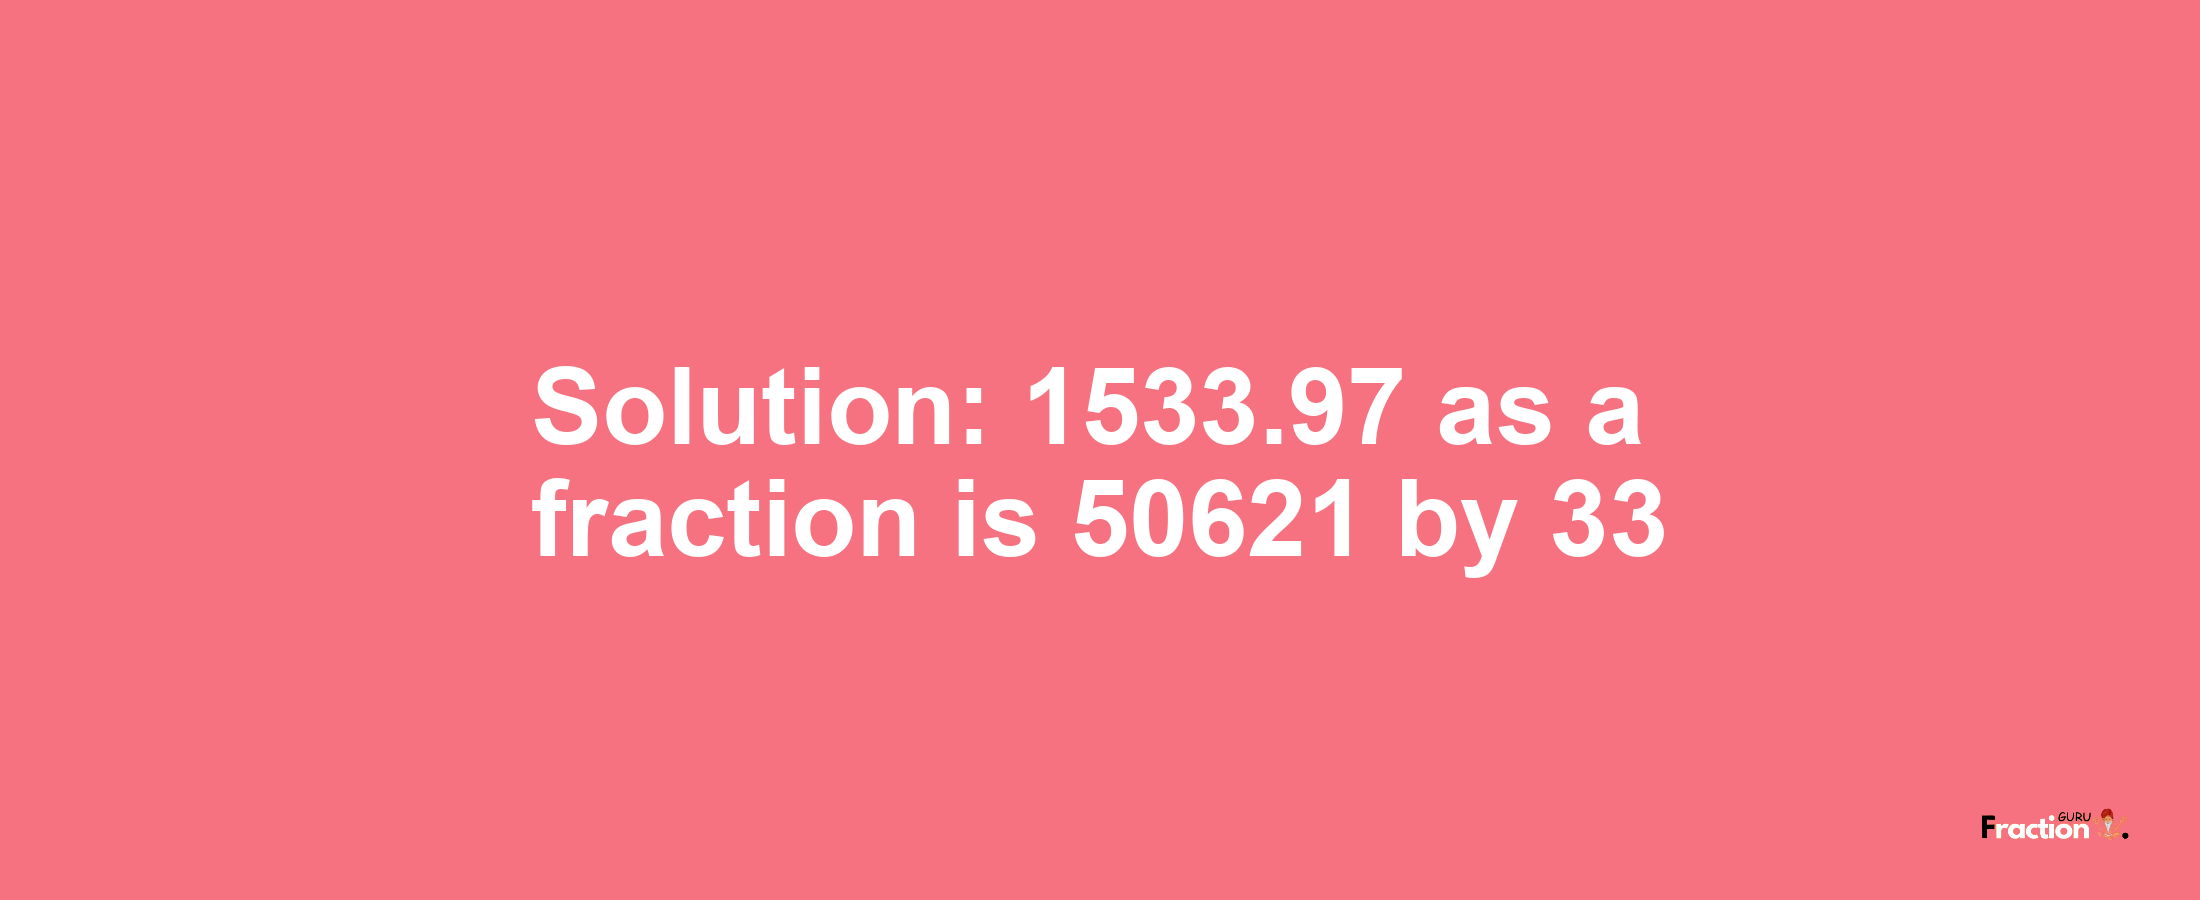 Solution:1533.97 as a fraction is 50621/33